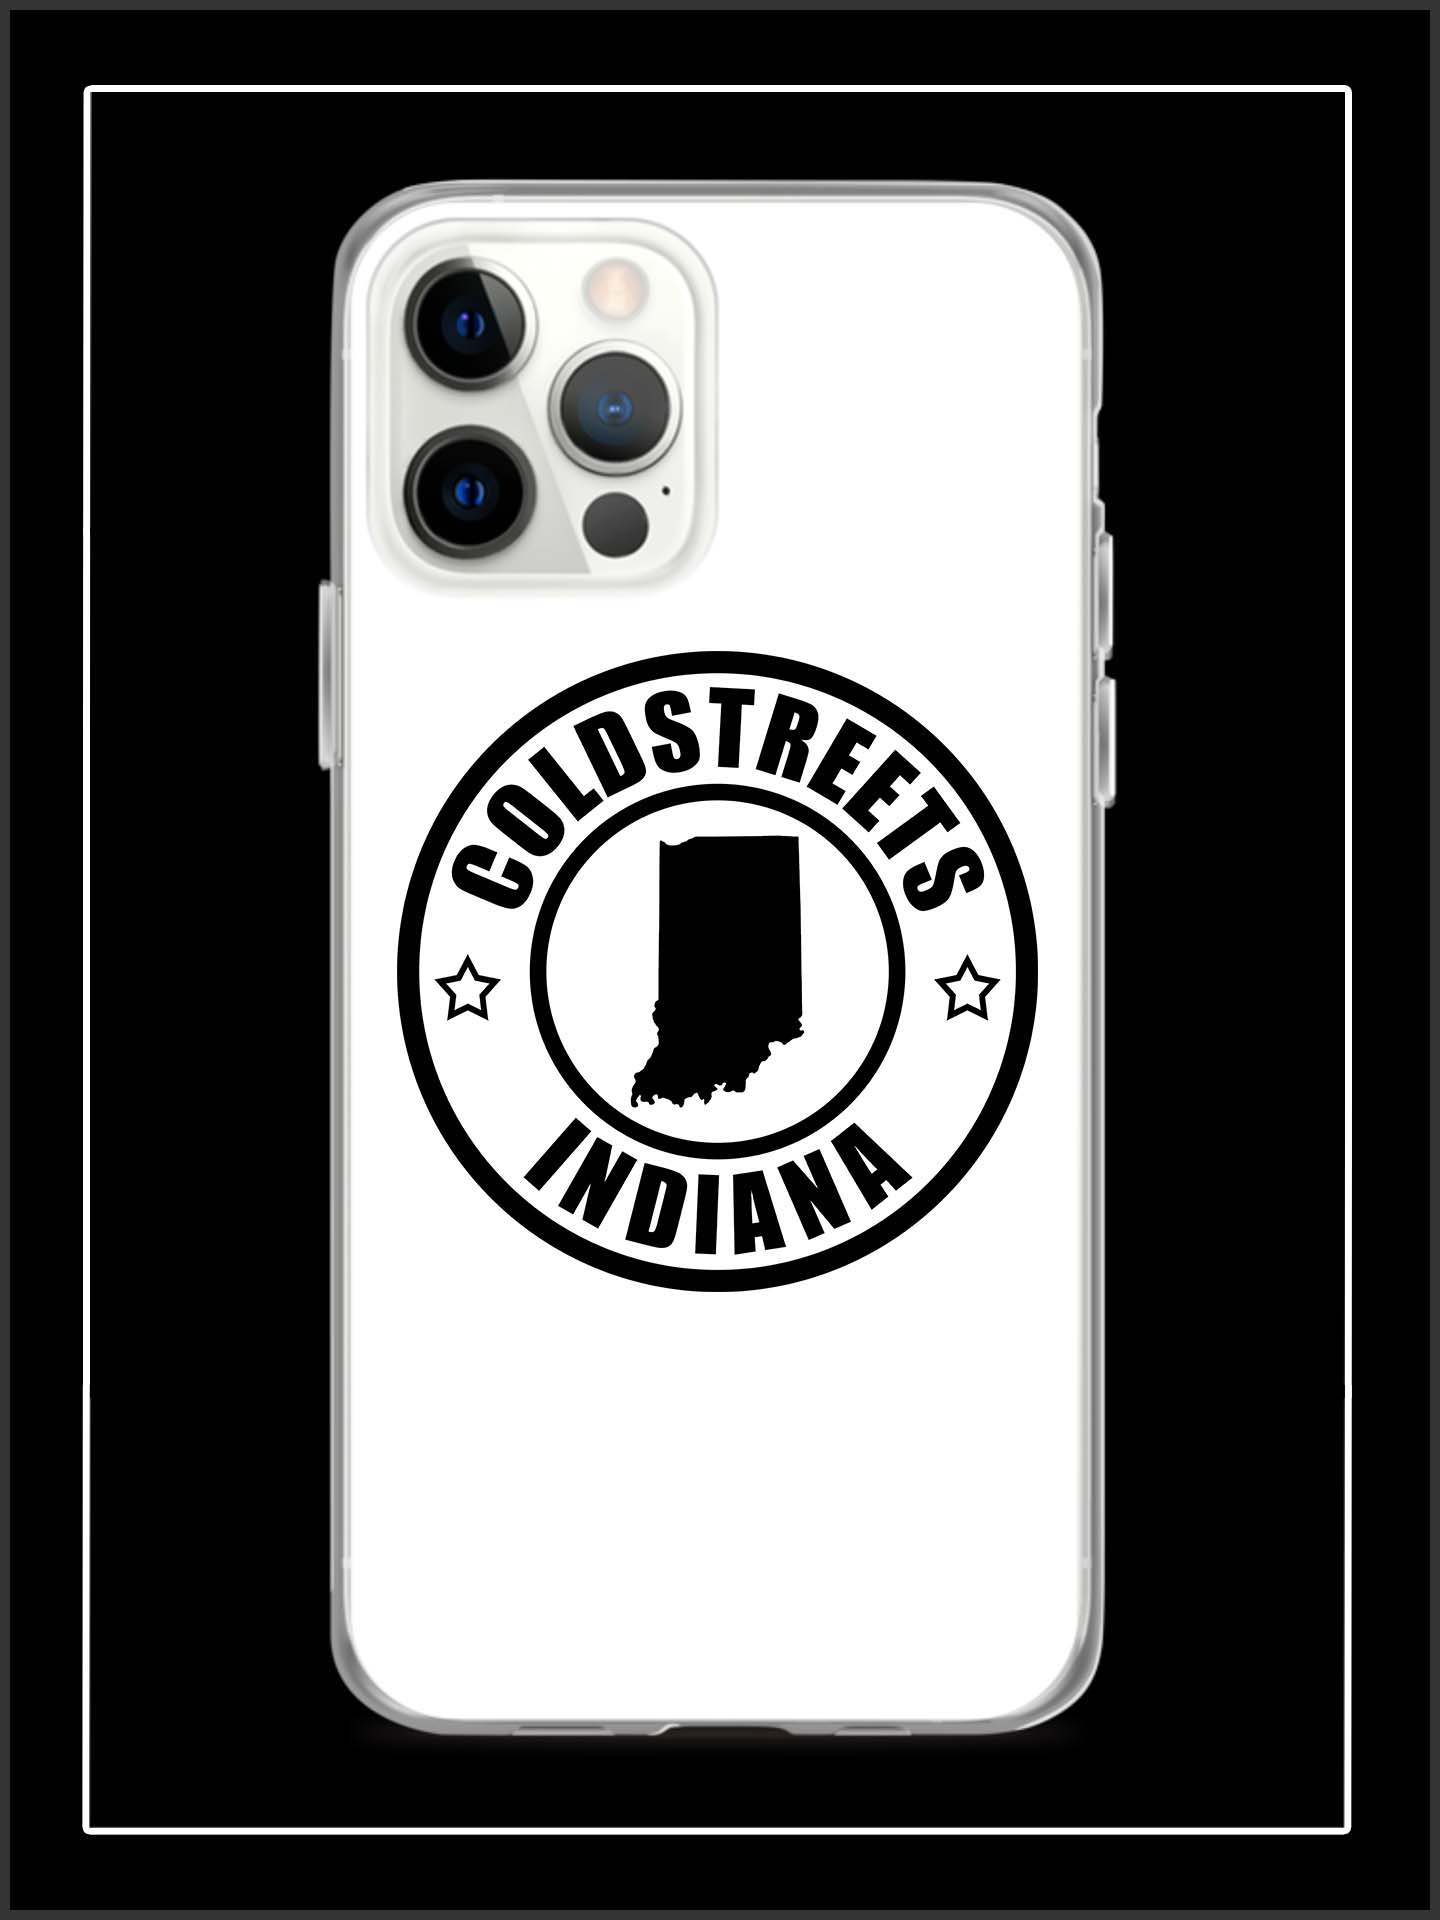 Cold Streets Indiana iPhone Cases